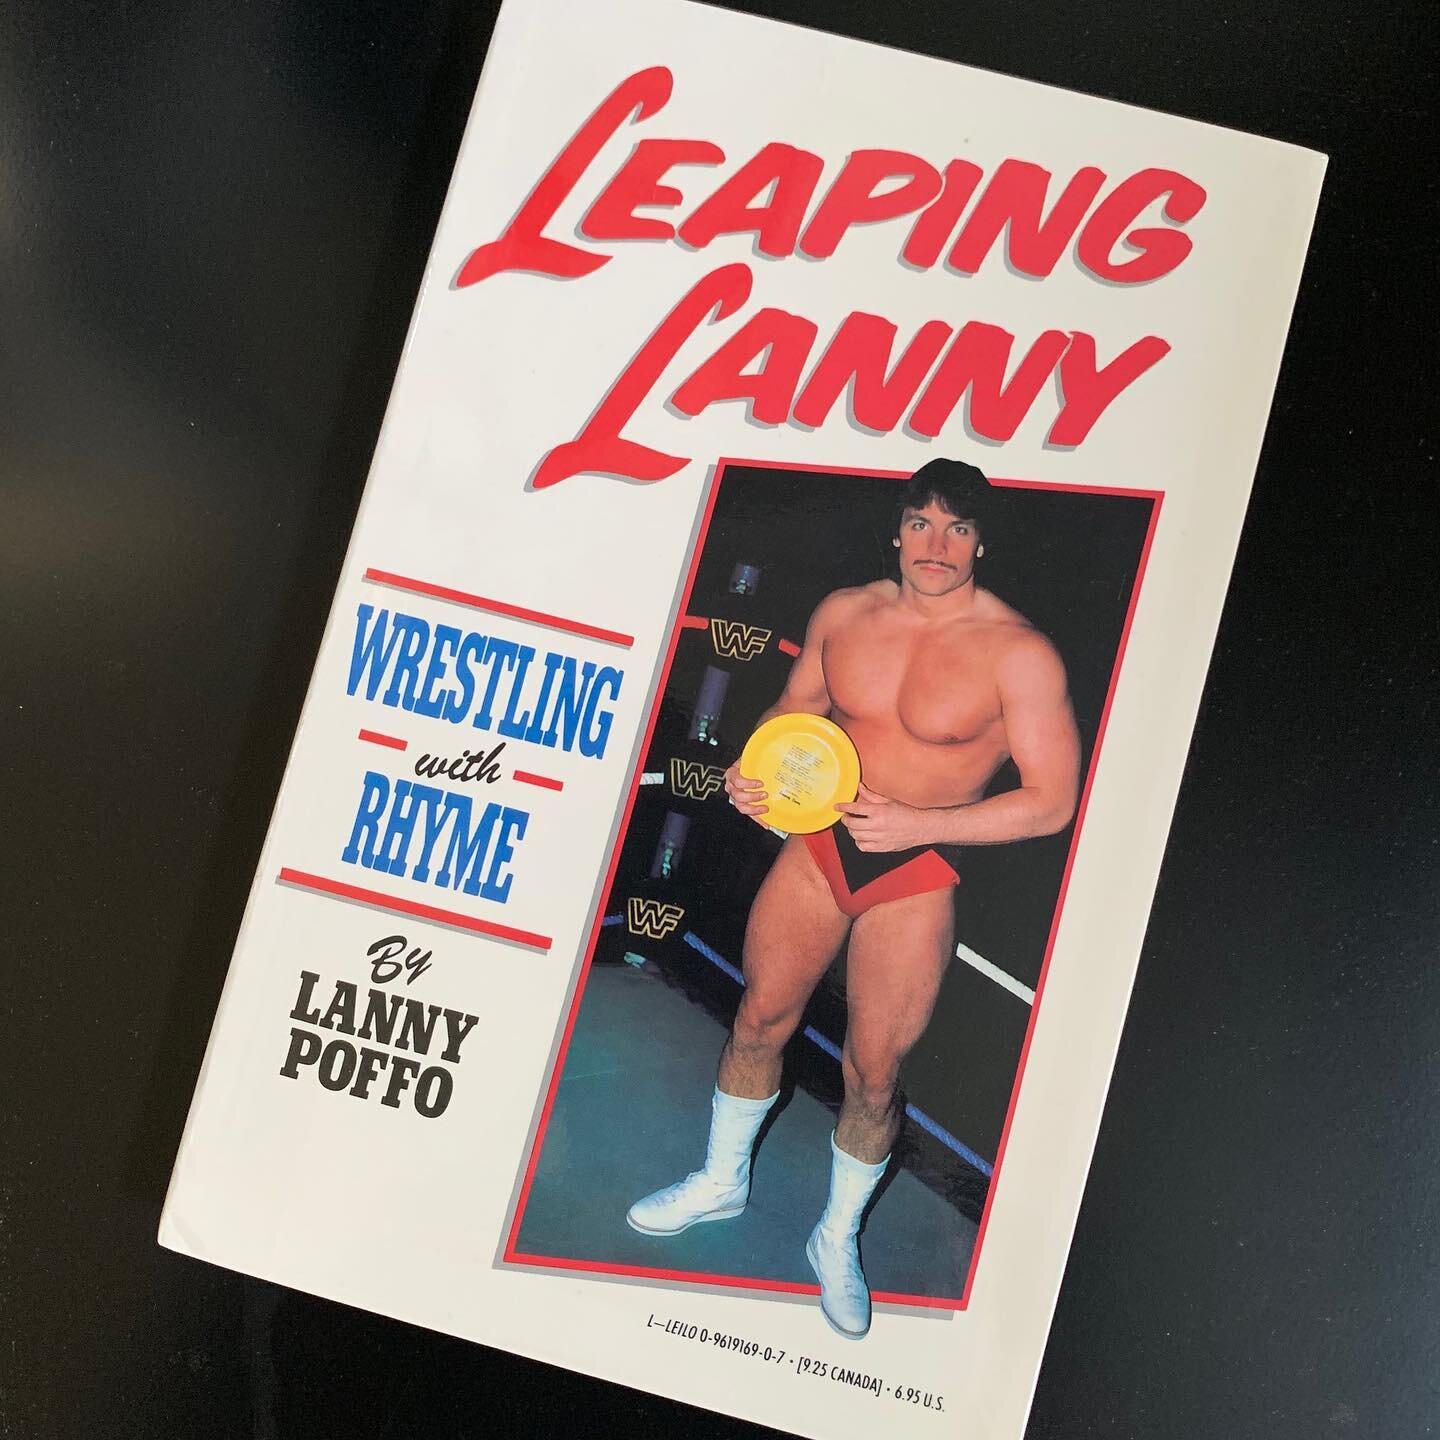 packing up books and came across this gem. wise words from the genius.
.
.
.
#thegenius #lannypoffo #leapinglannypoffo @lannypoffo #wwf #niceguys #poetsofinstagram